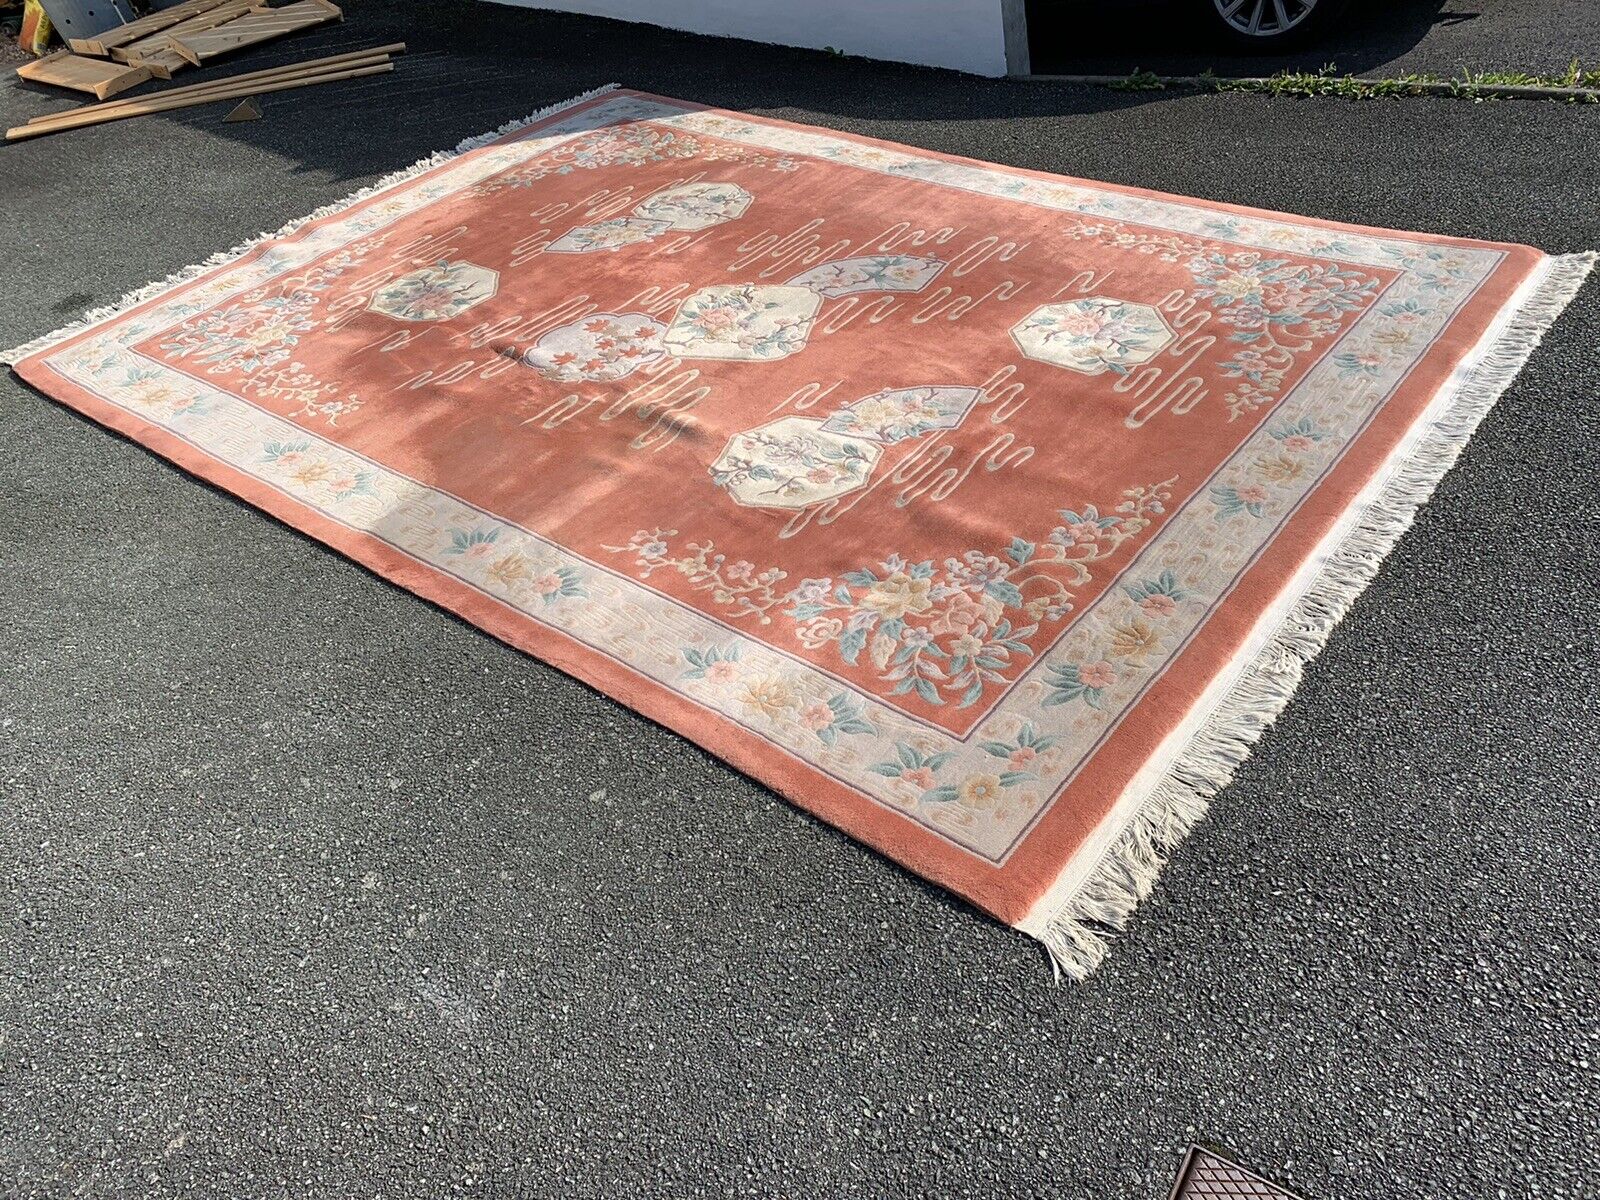 Imperial Jewel Authentic And Original Chinese Oriental Rug